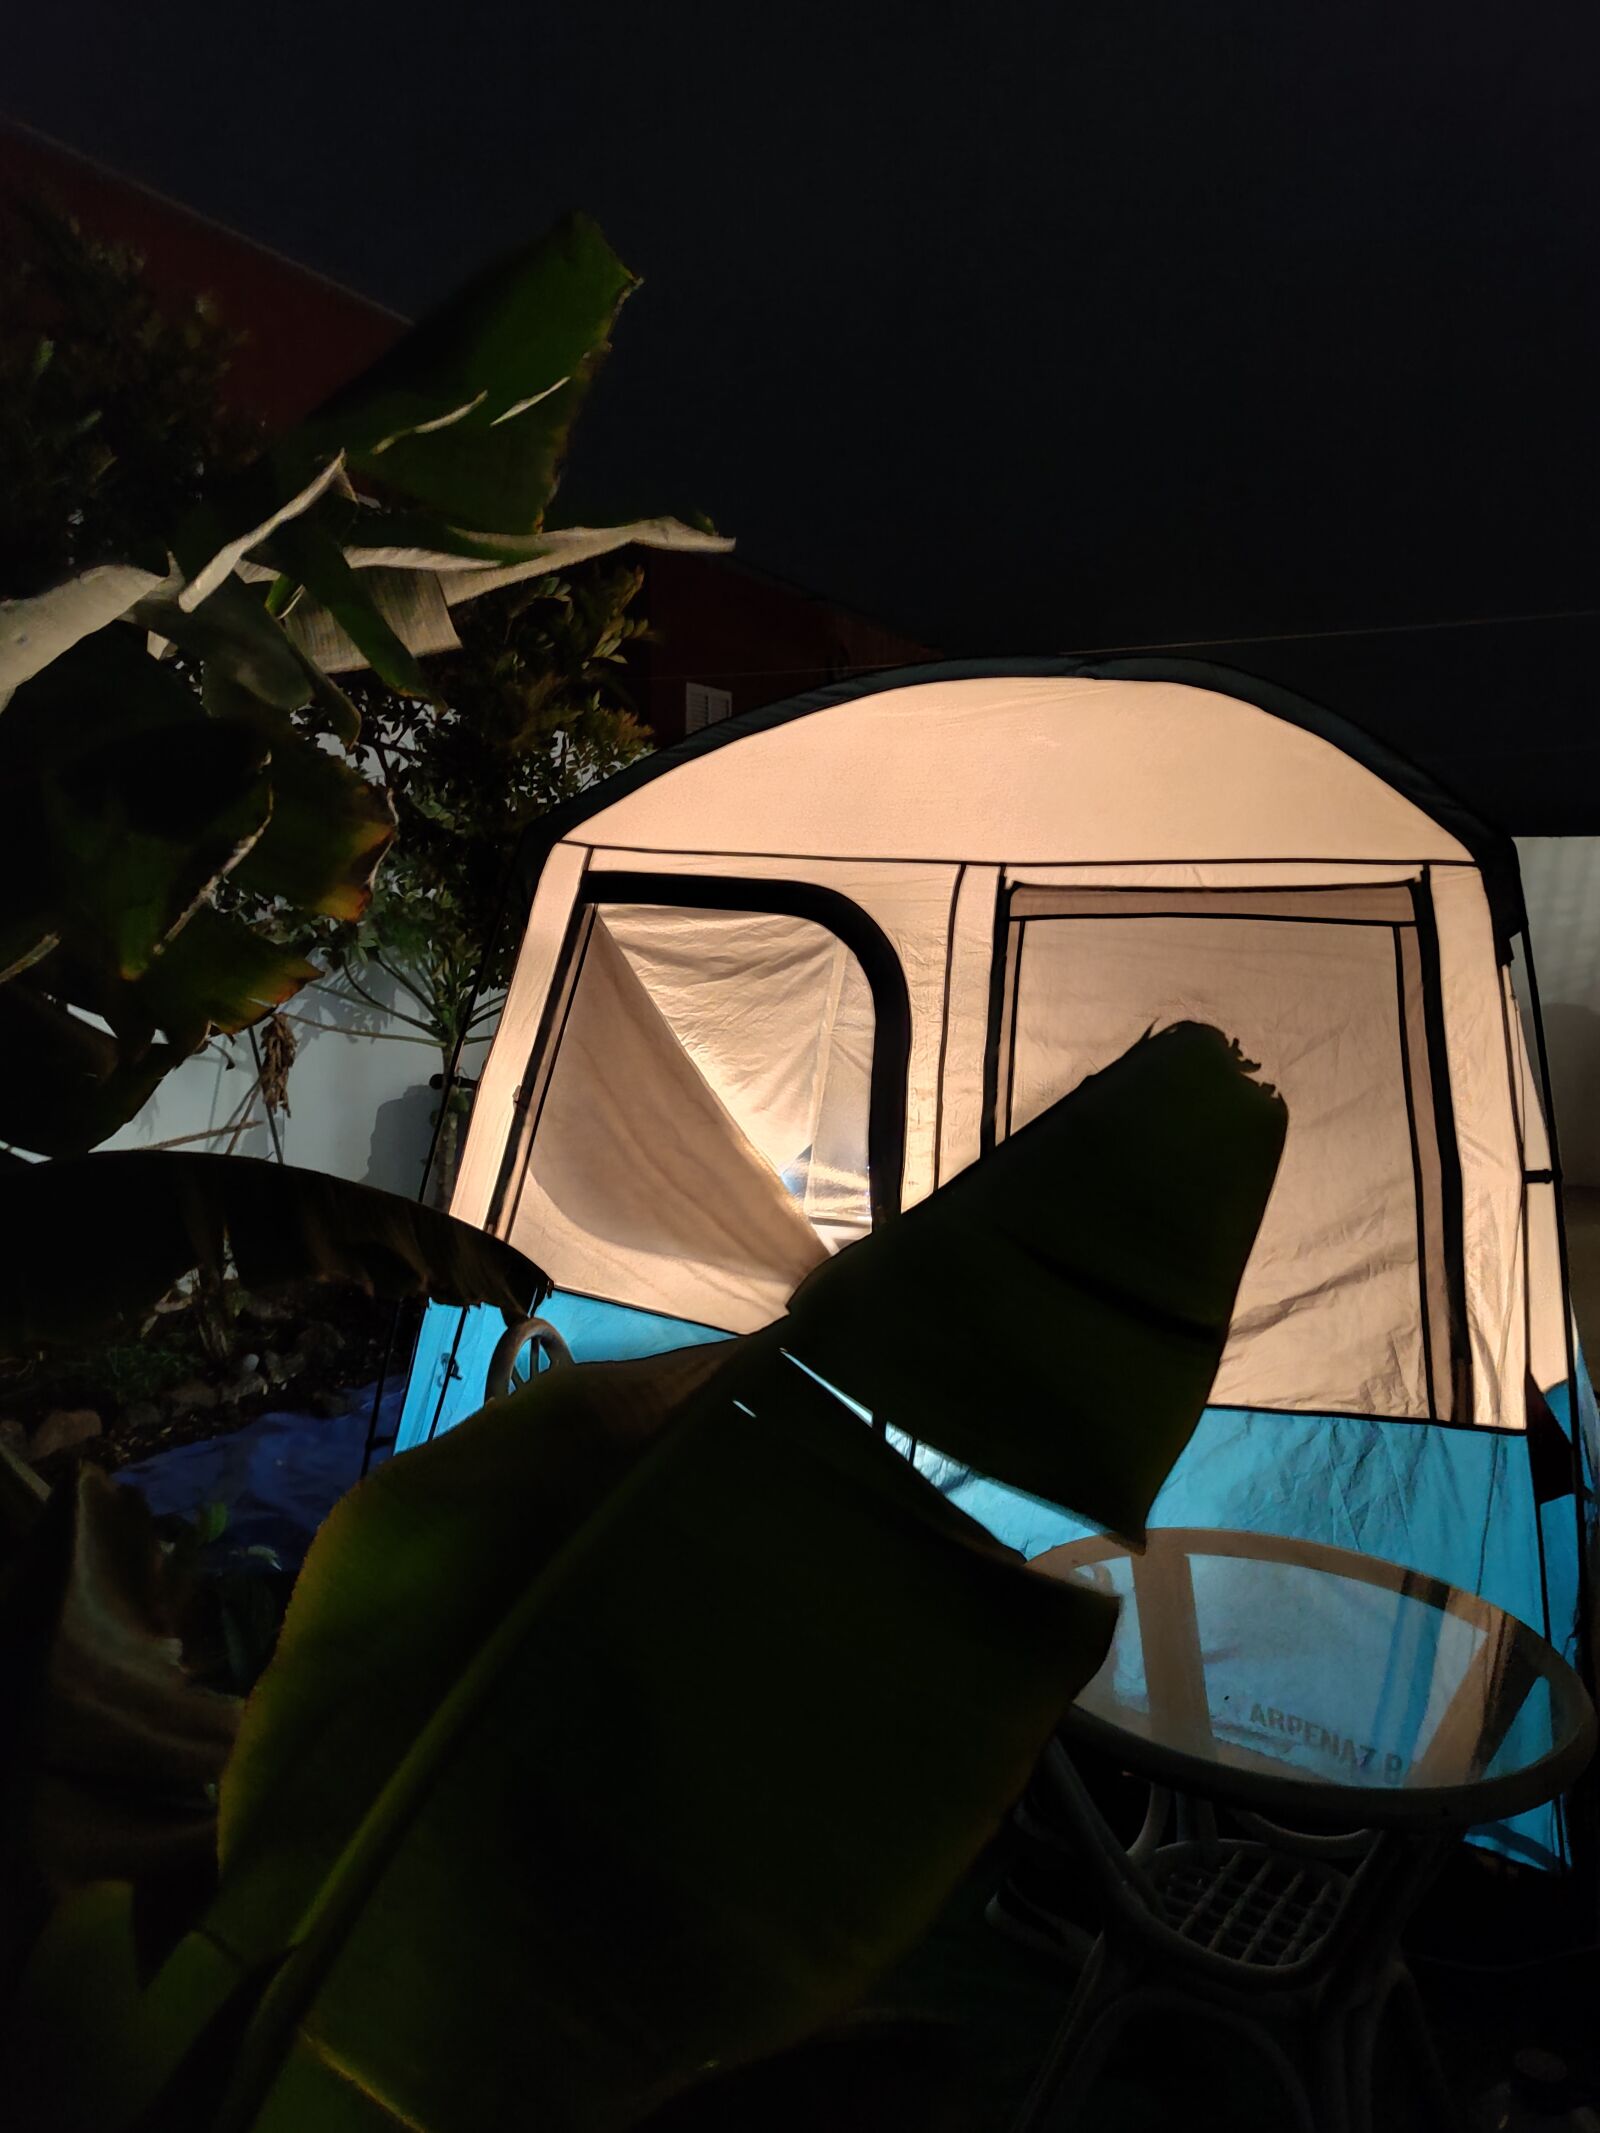 Xiaomi Mi Note 10 sample photo. Roofless, camping, stars photography